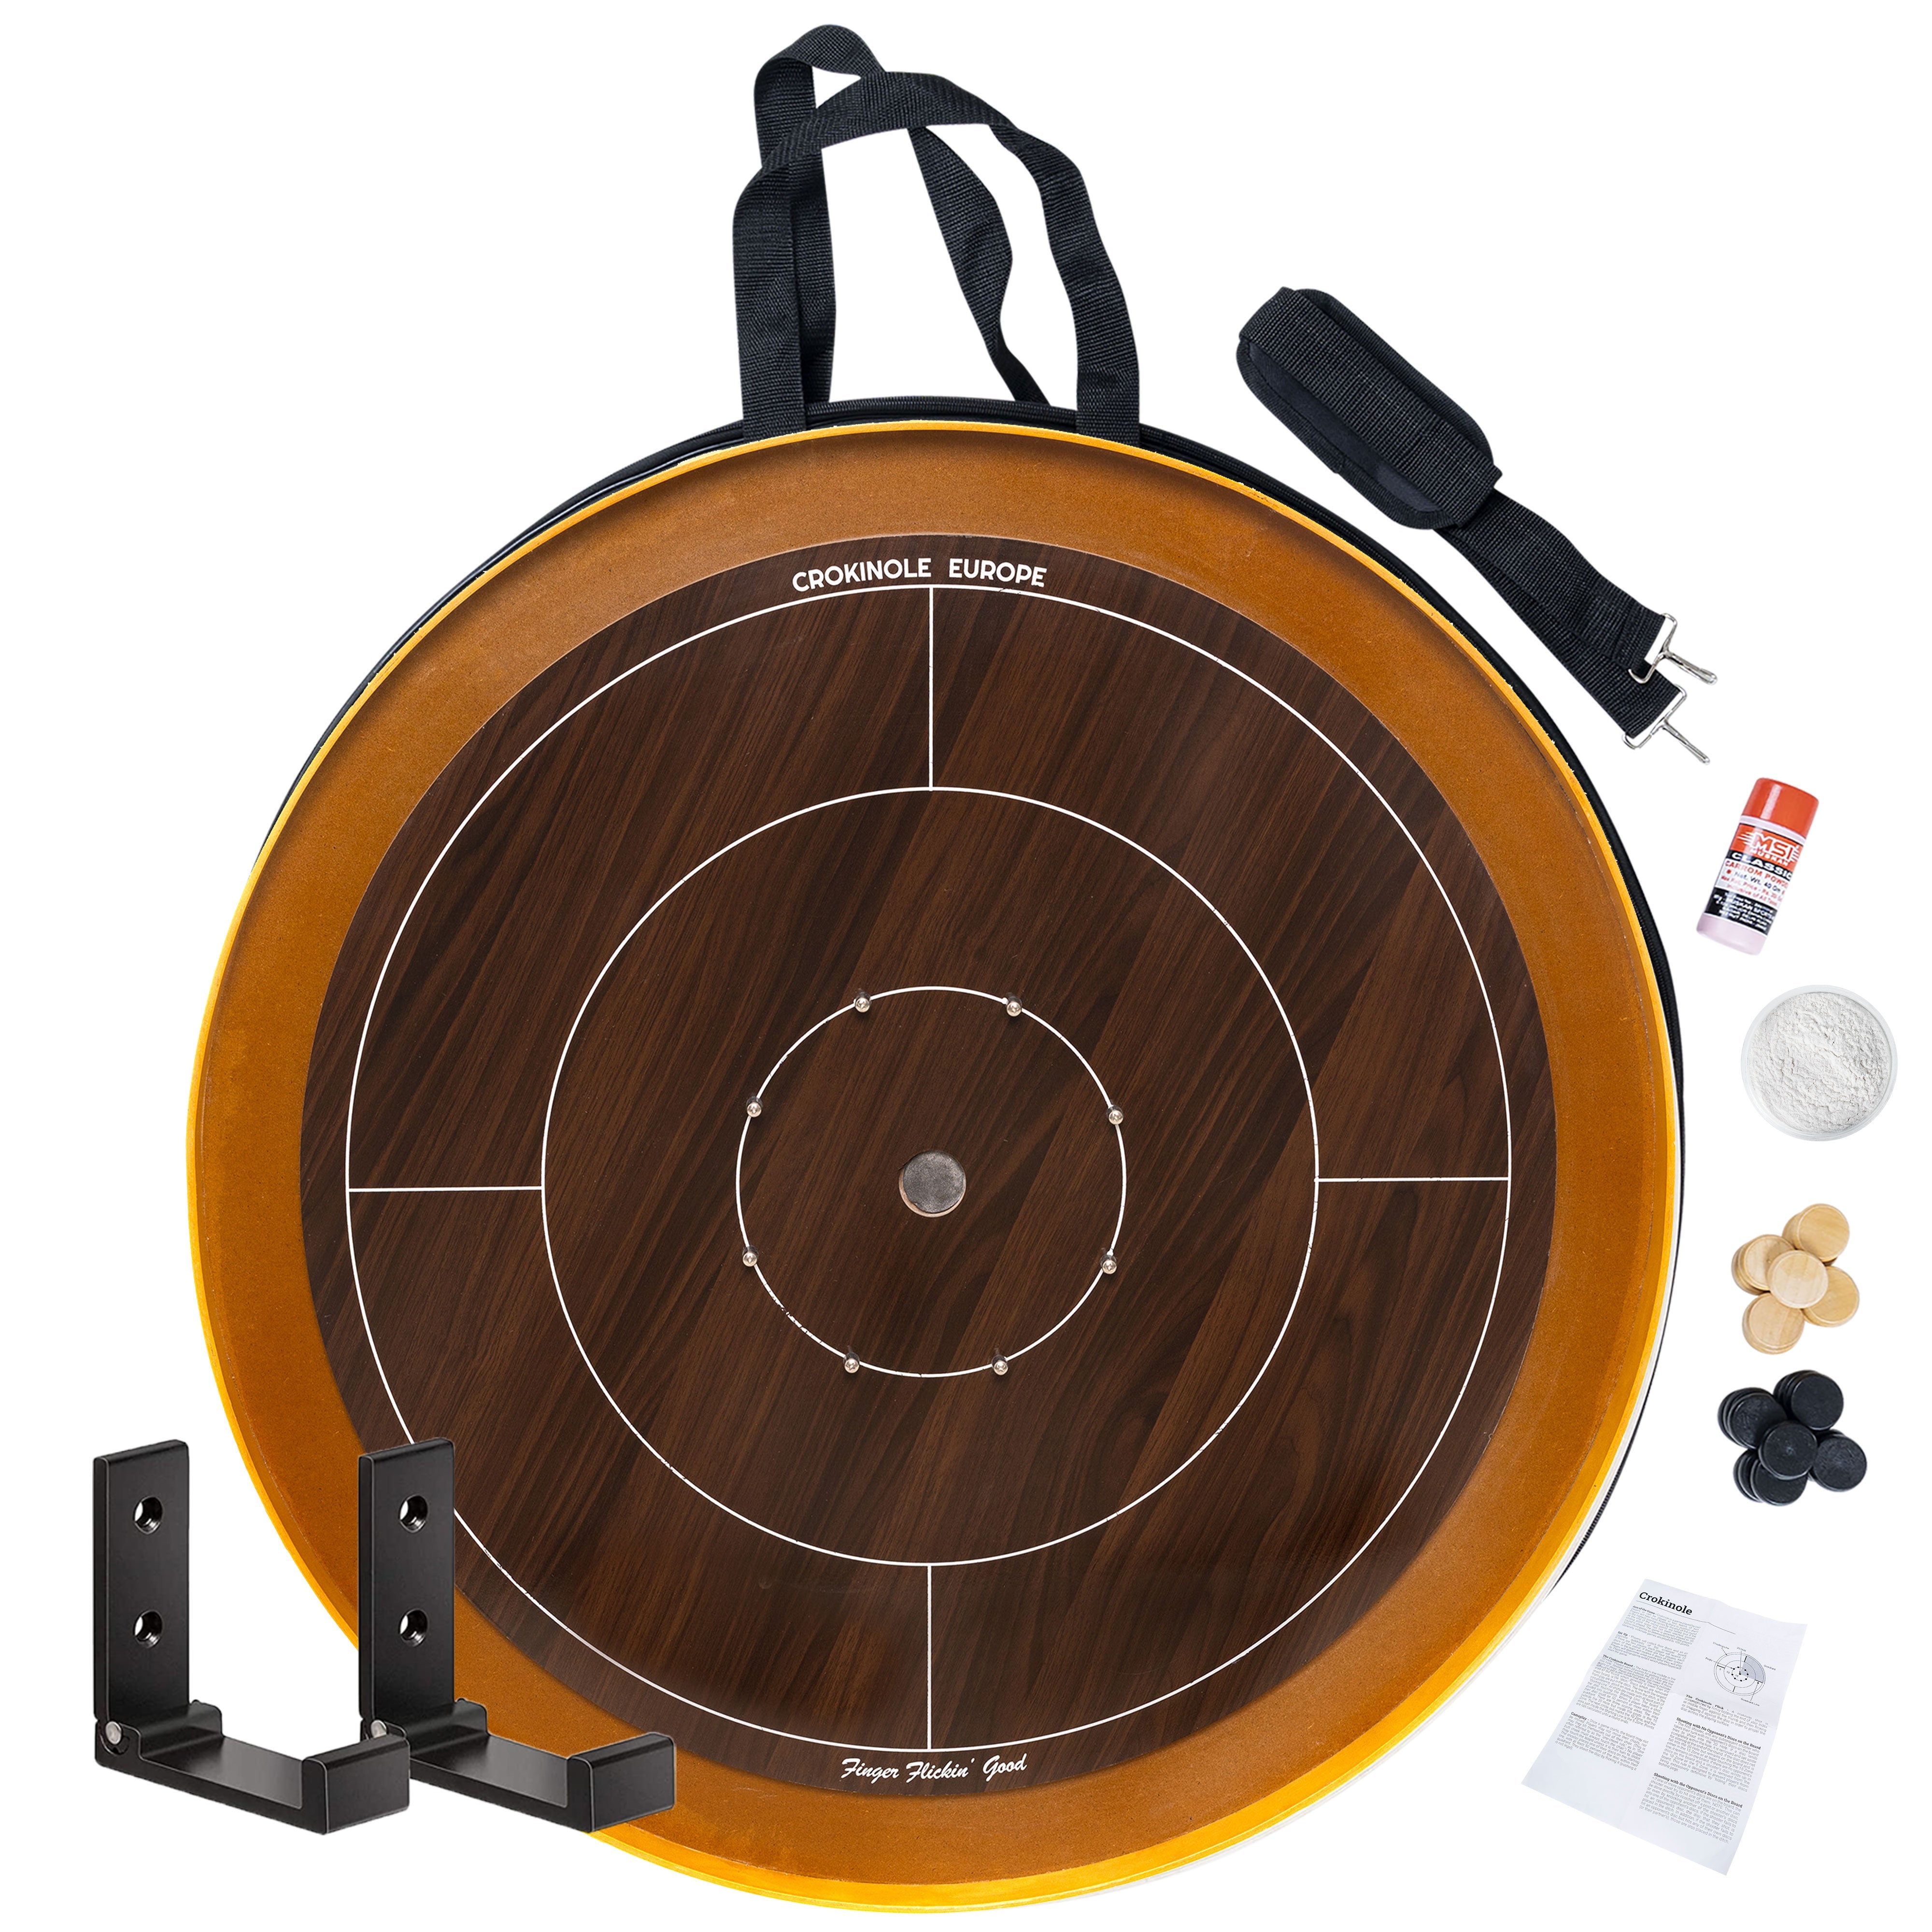 Crokinole Board Game - 'dark' Tournament Board, 26 Discs, Carrom Powder, Carrying Bag - Official Dimensions - Strategic Game for Young and Old - Buy Crokinole